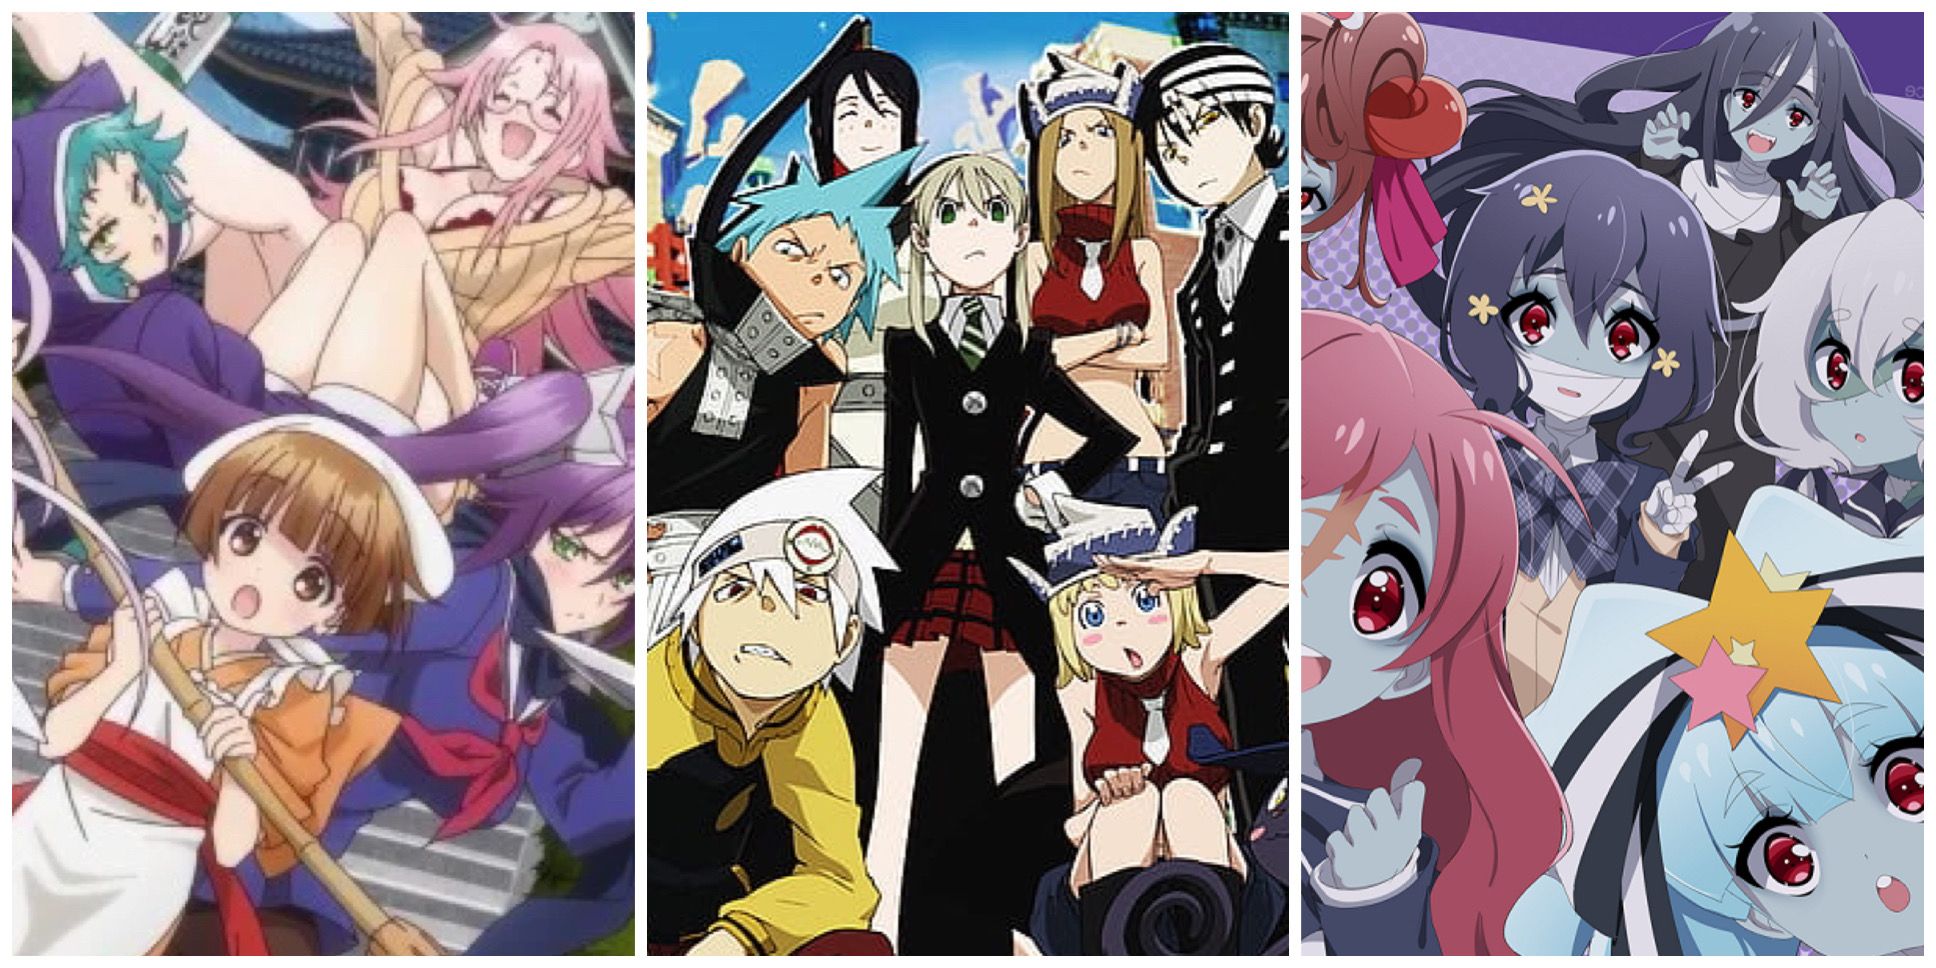 Our Favorite Anime Costumes & More - Spirit Halloween Blog